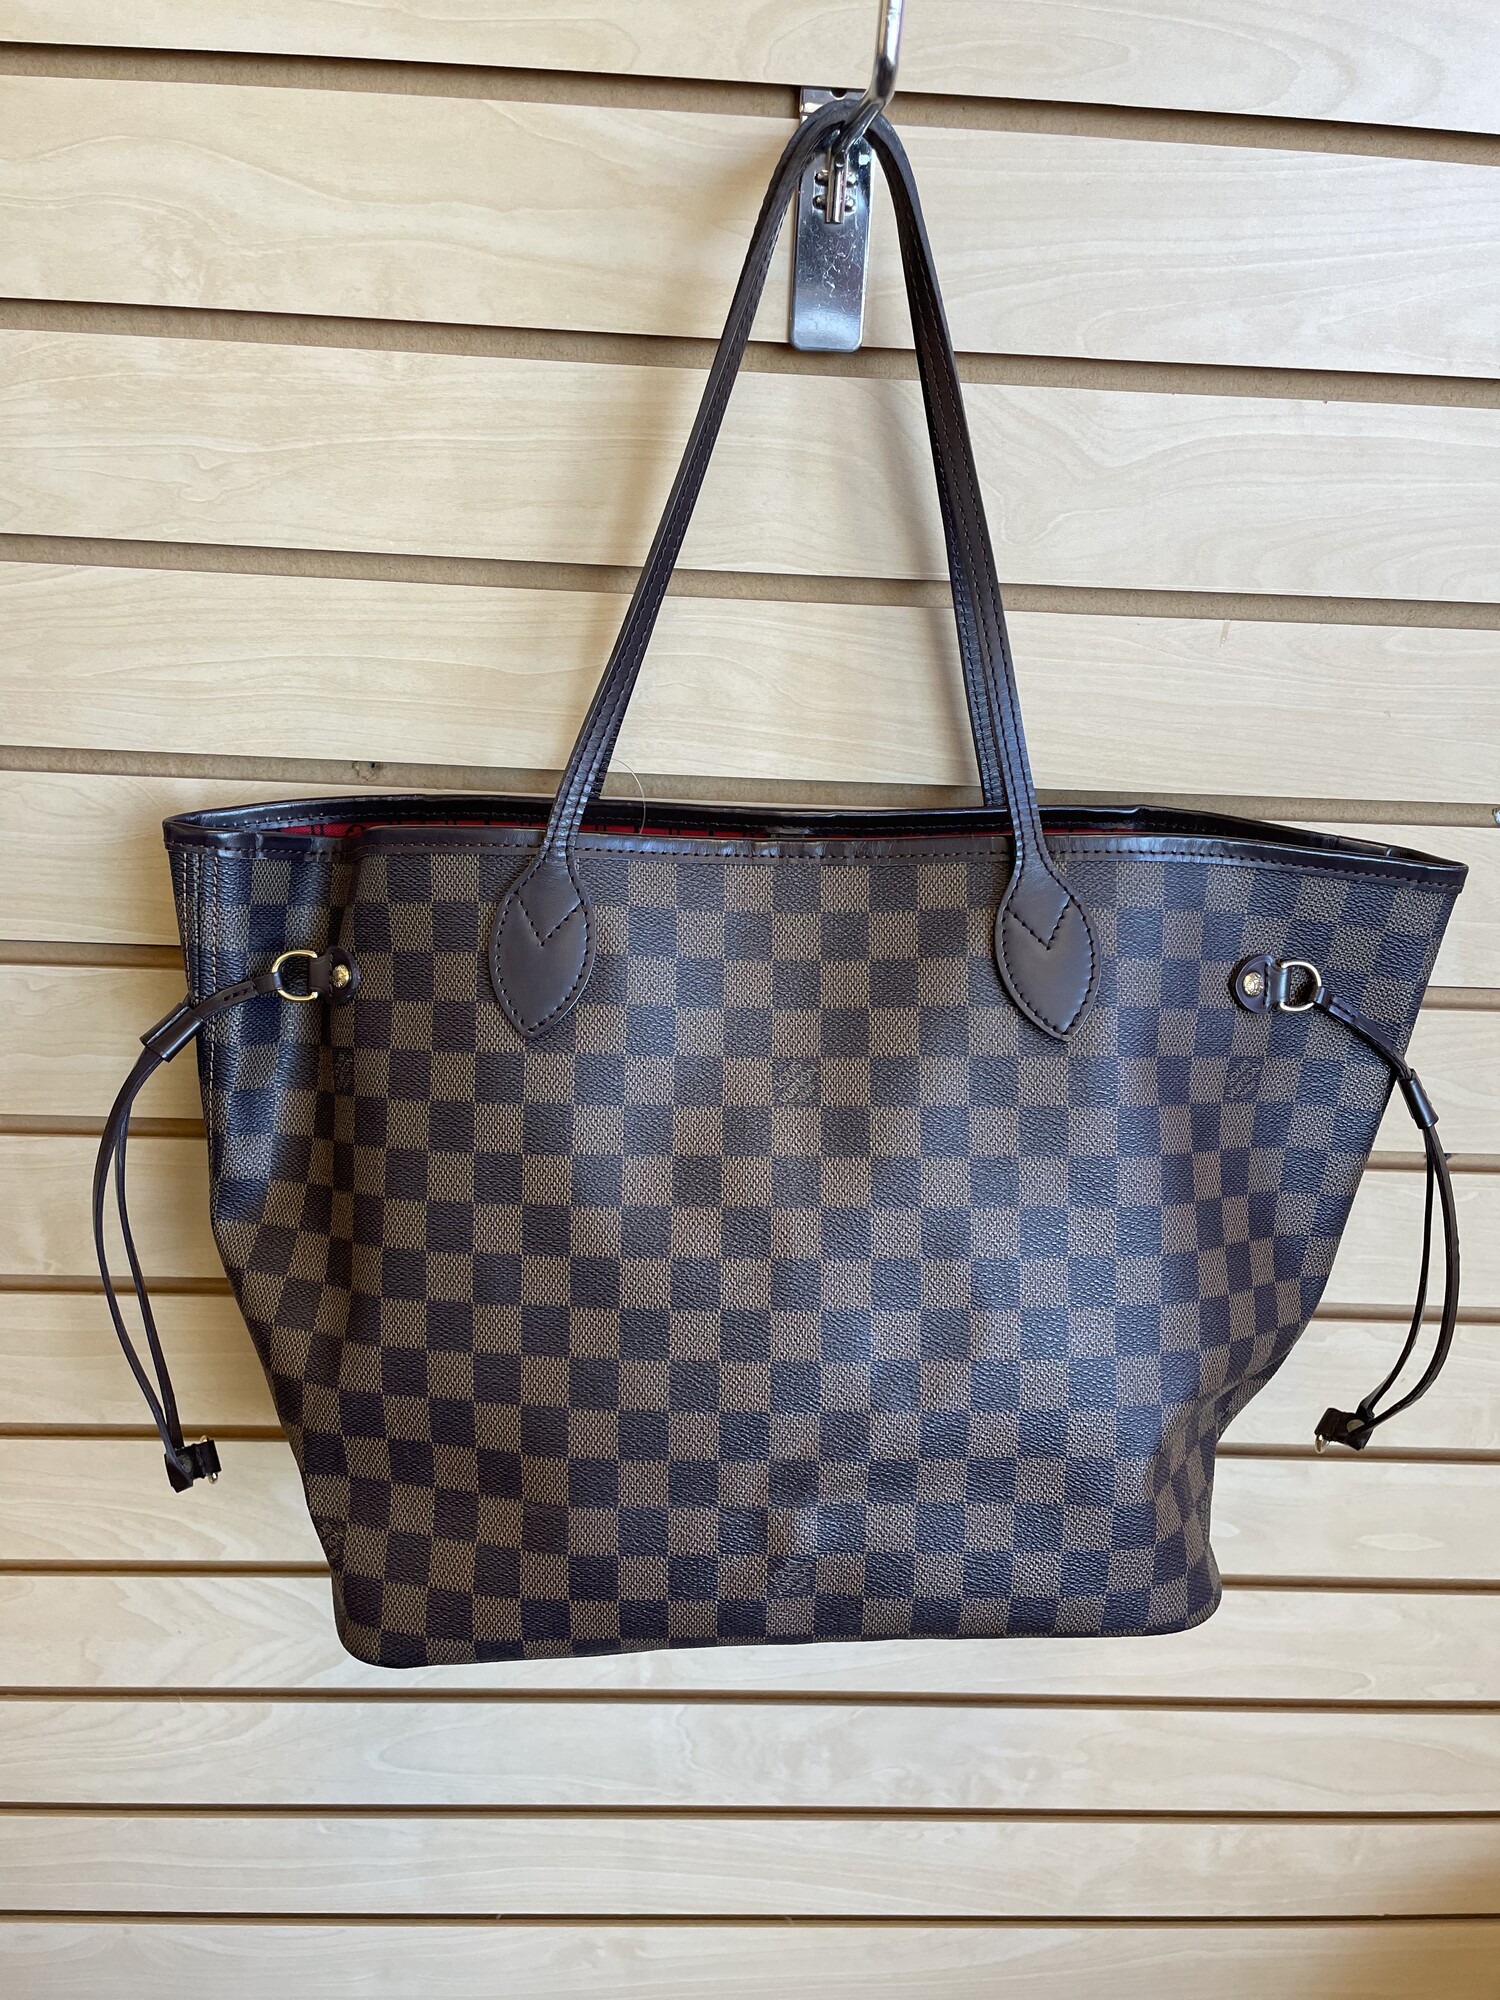 LV Damier Neverfull MM, Brown, Size: As Is
Damier Ebene Pattern, Brass Hardware, Dual Shoulder Straps, Leather Trim Embellishment, Canvas Lining With Staining On The Bottom Of The Lining & Single Interior Pocket, Clasp Closure at Top.

Details, Shoulder Strap Drop: 8.25 inches, Height: 11 inches, Width: 12.5 inches, Depth: 6.25 inches.